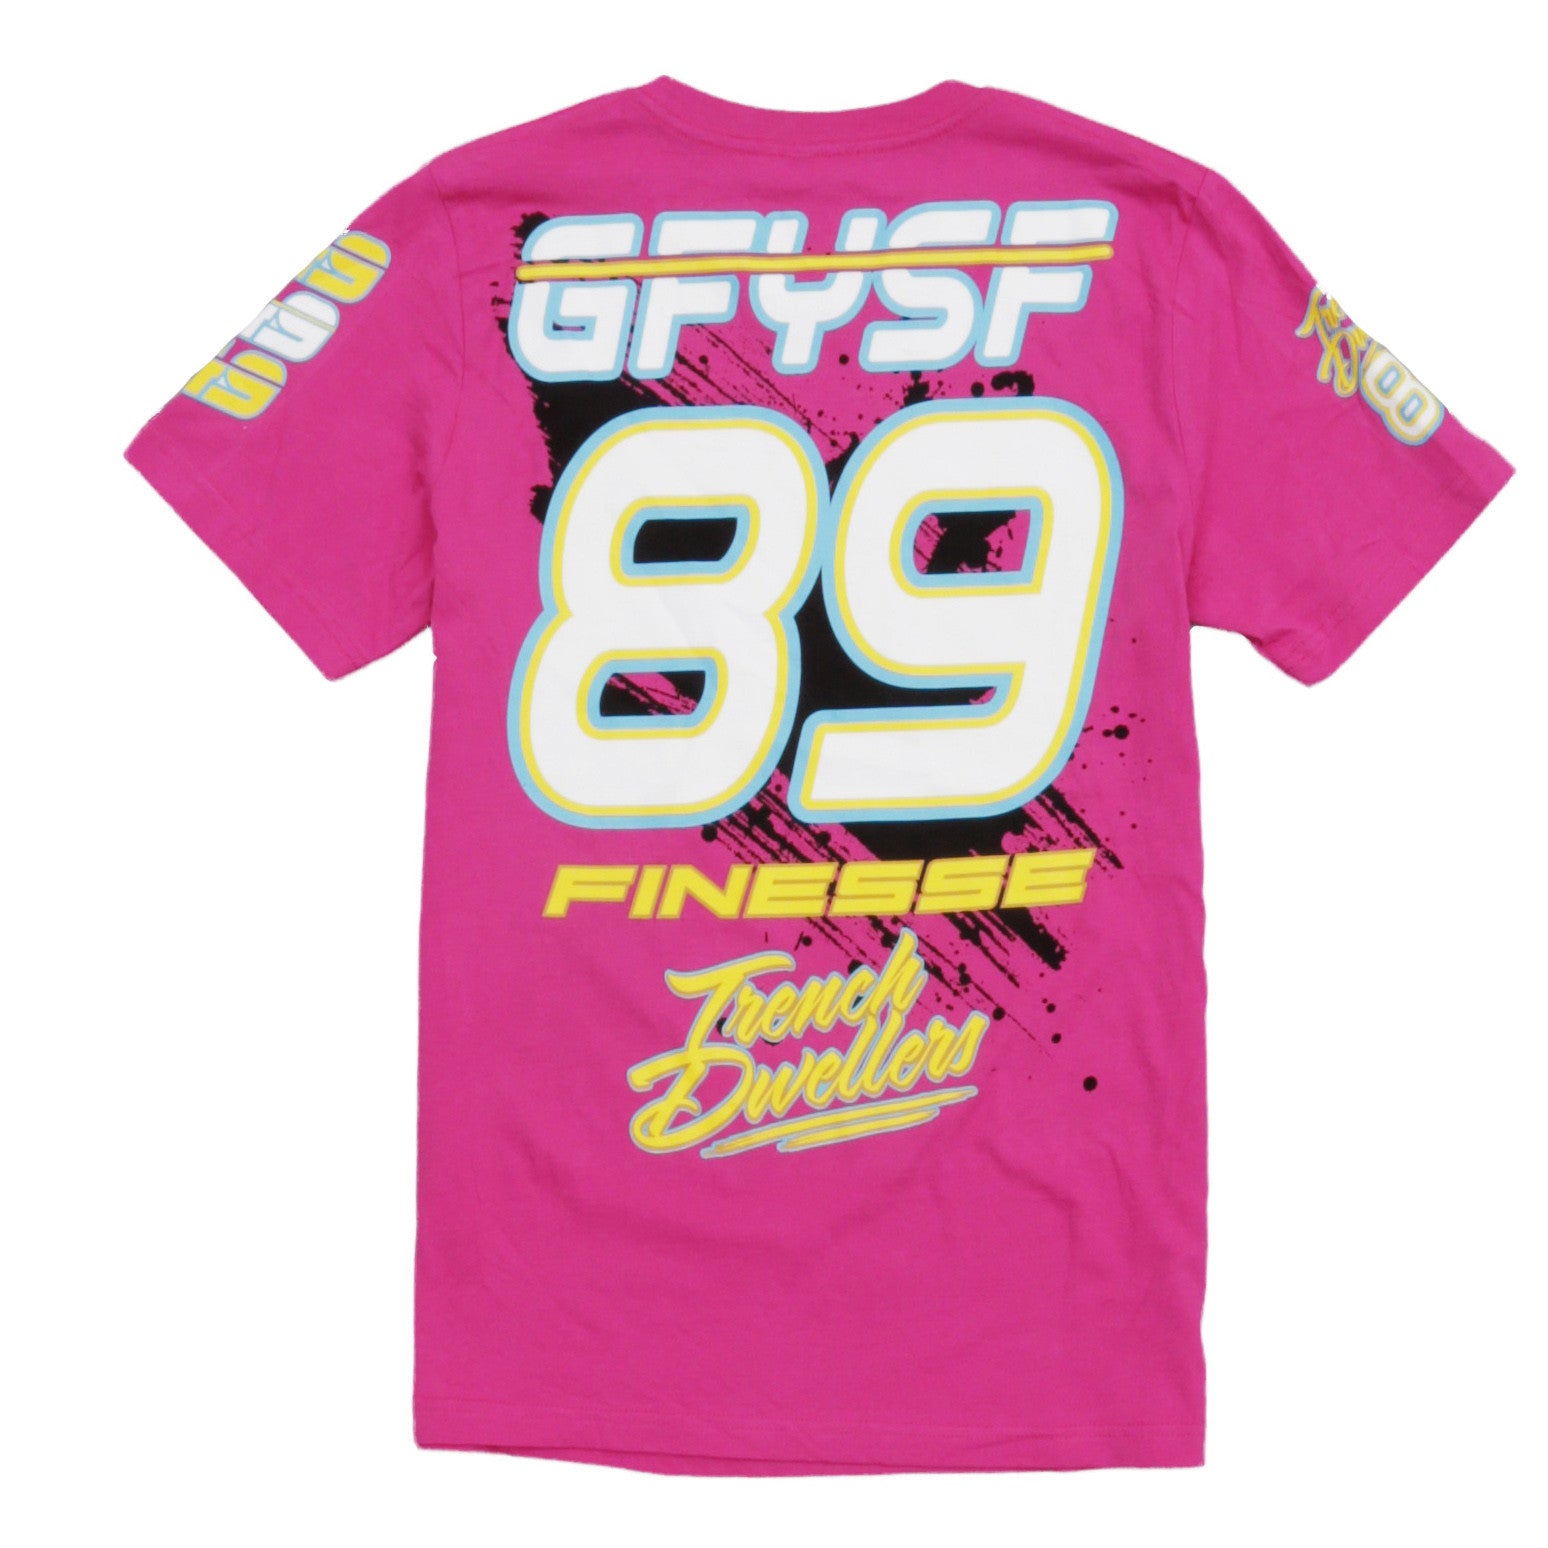 Team Finesse Jersey Tee Pink - 2